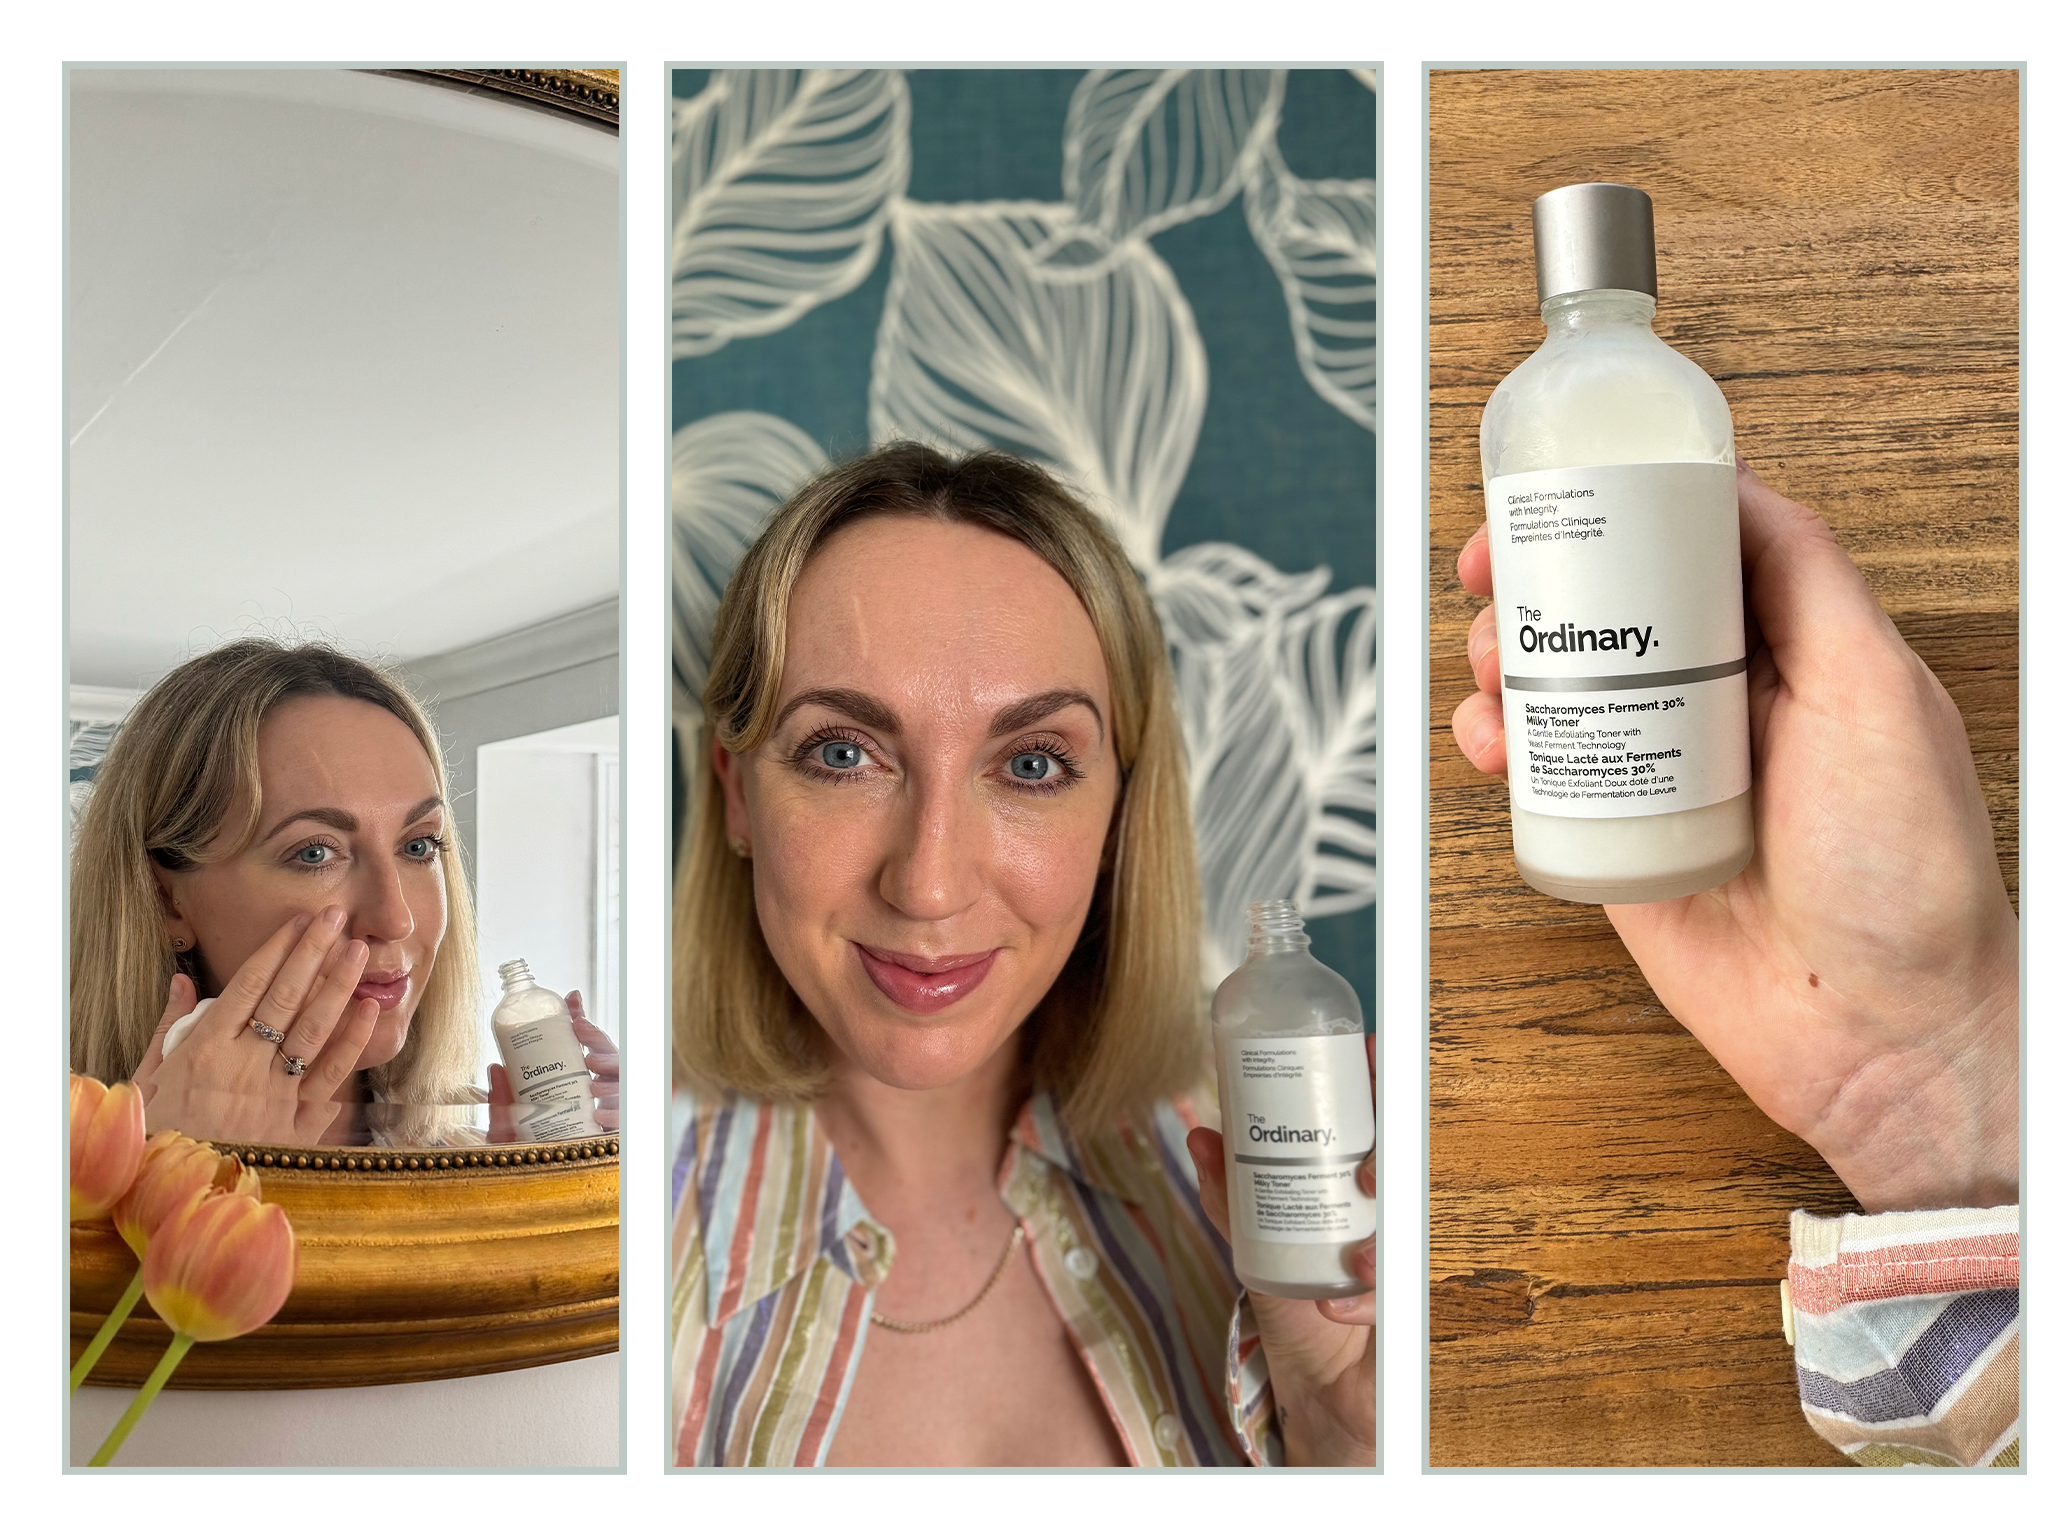 Our tester in action with The Ordinary’s toner